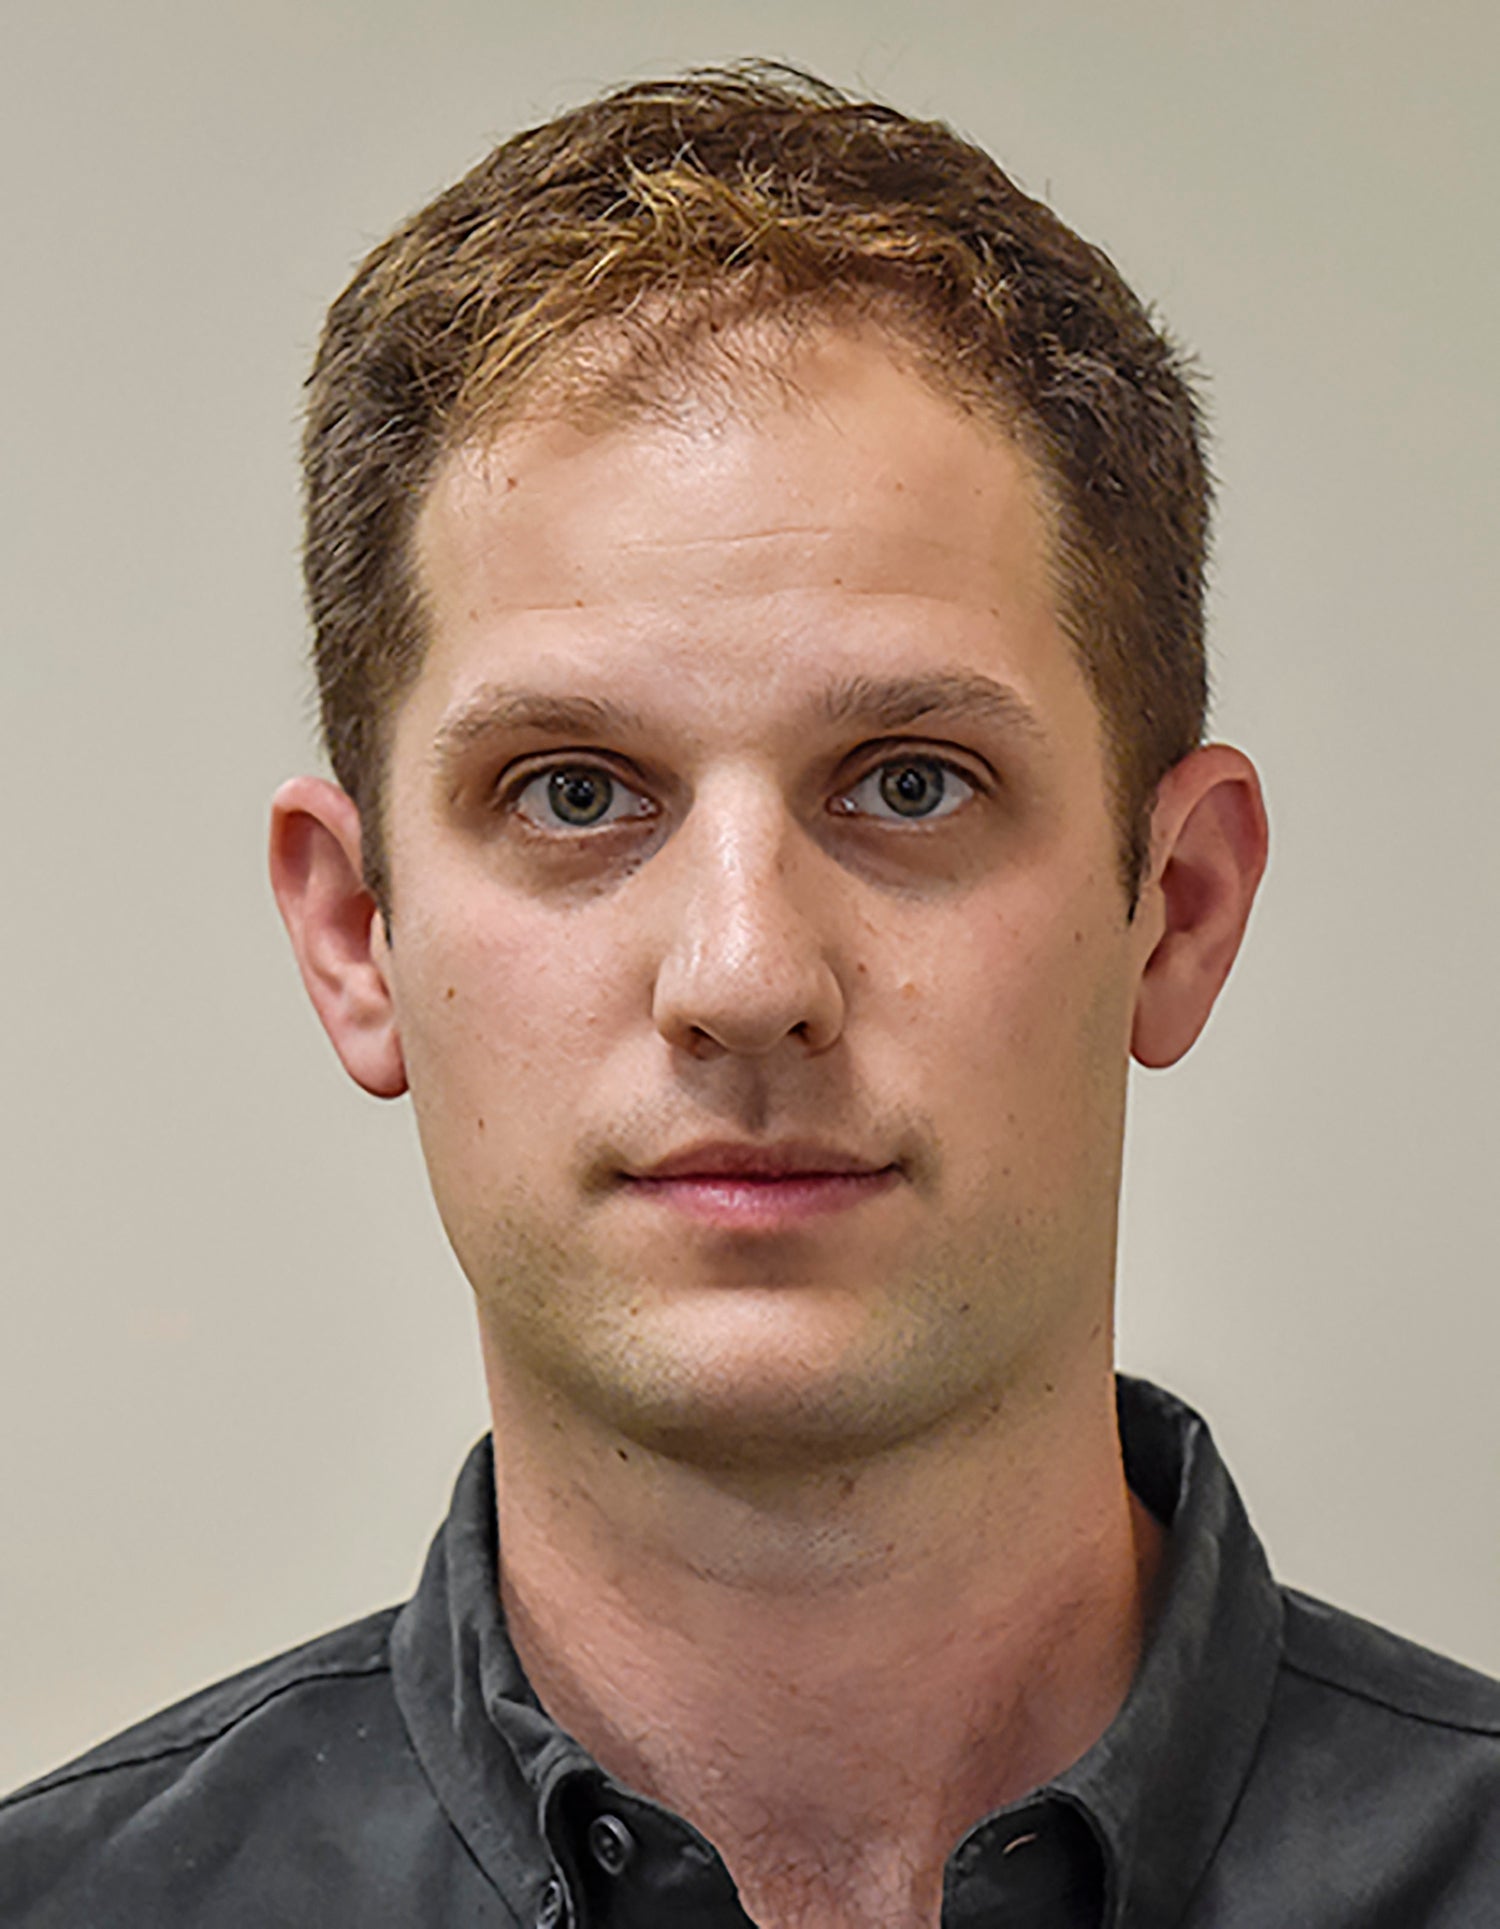 ID photo of Evan Gershkovich, an American reporter for the Wall Street Journal. 